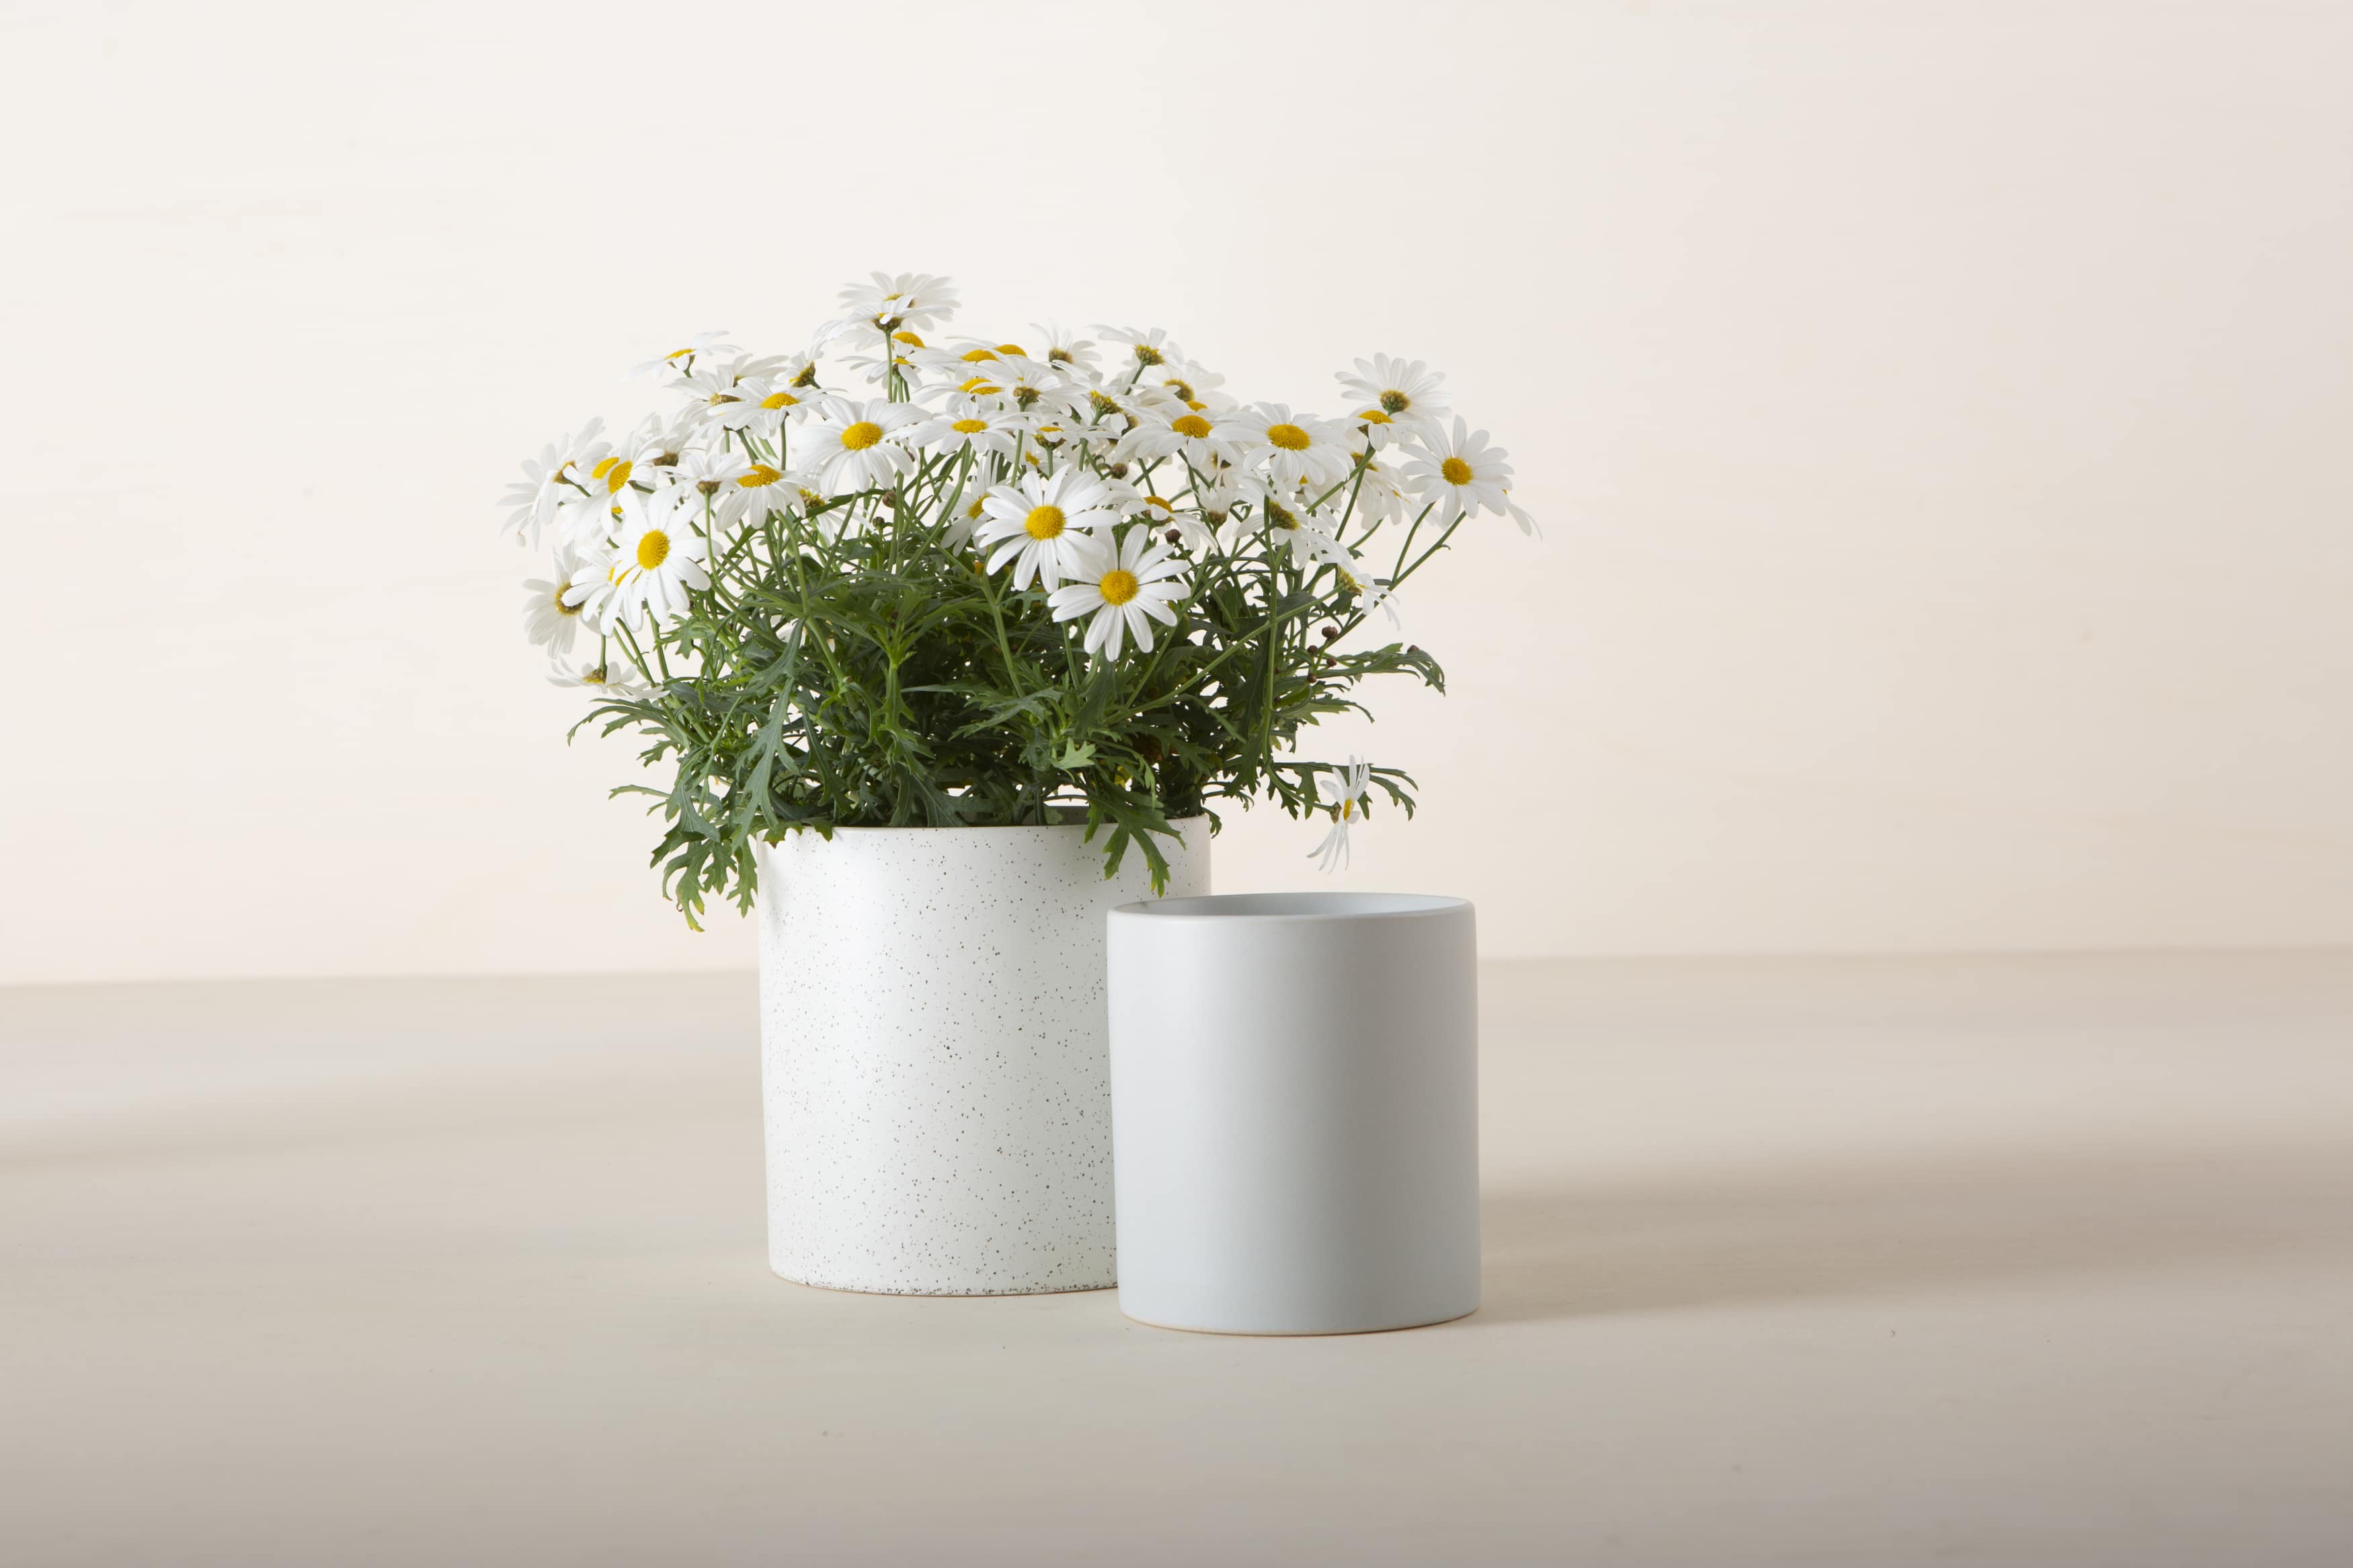  | This minimalistic flower pot and vase feature clean lines and the cutest ditsy pattern. It looks wonderful with colourful cut flowers on the dinner table, bar cart or in the lounge area. If you prefer potted daisies or herbs instead of cut flowers, this ceramic pot is also a great option for your decoration. | 